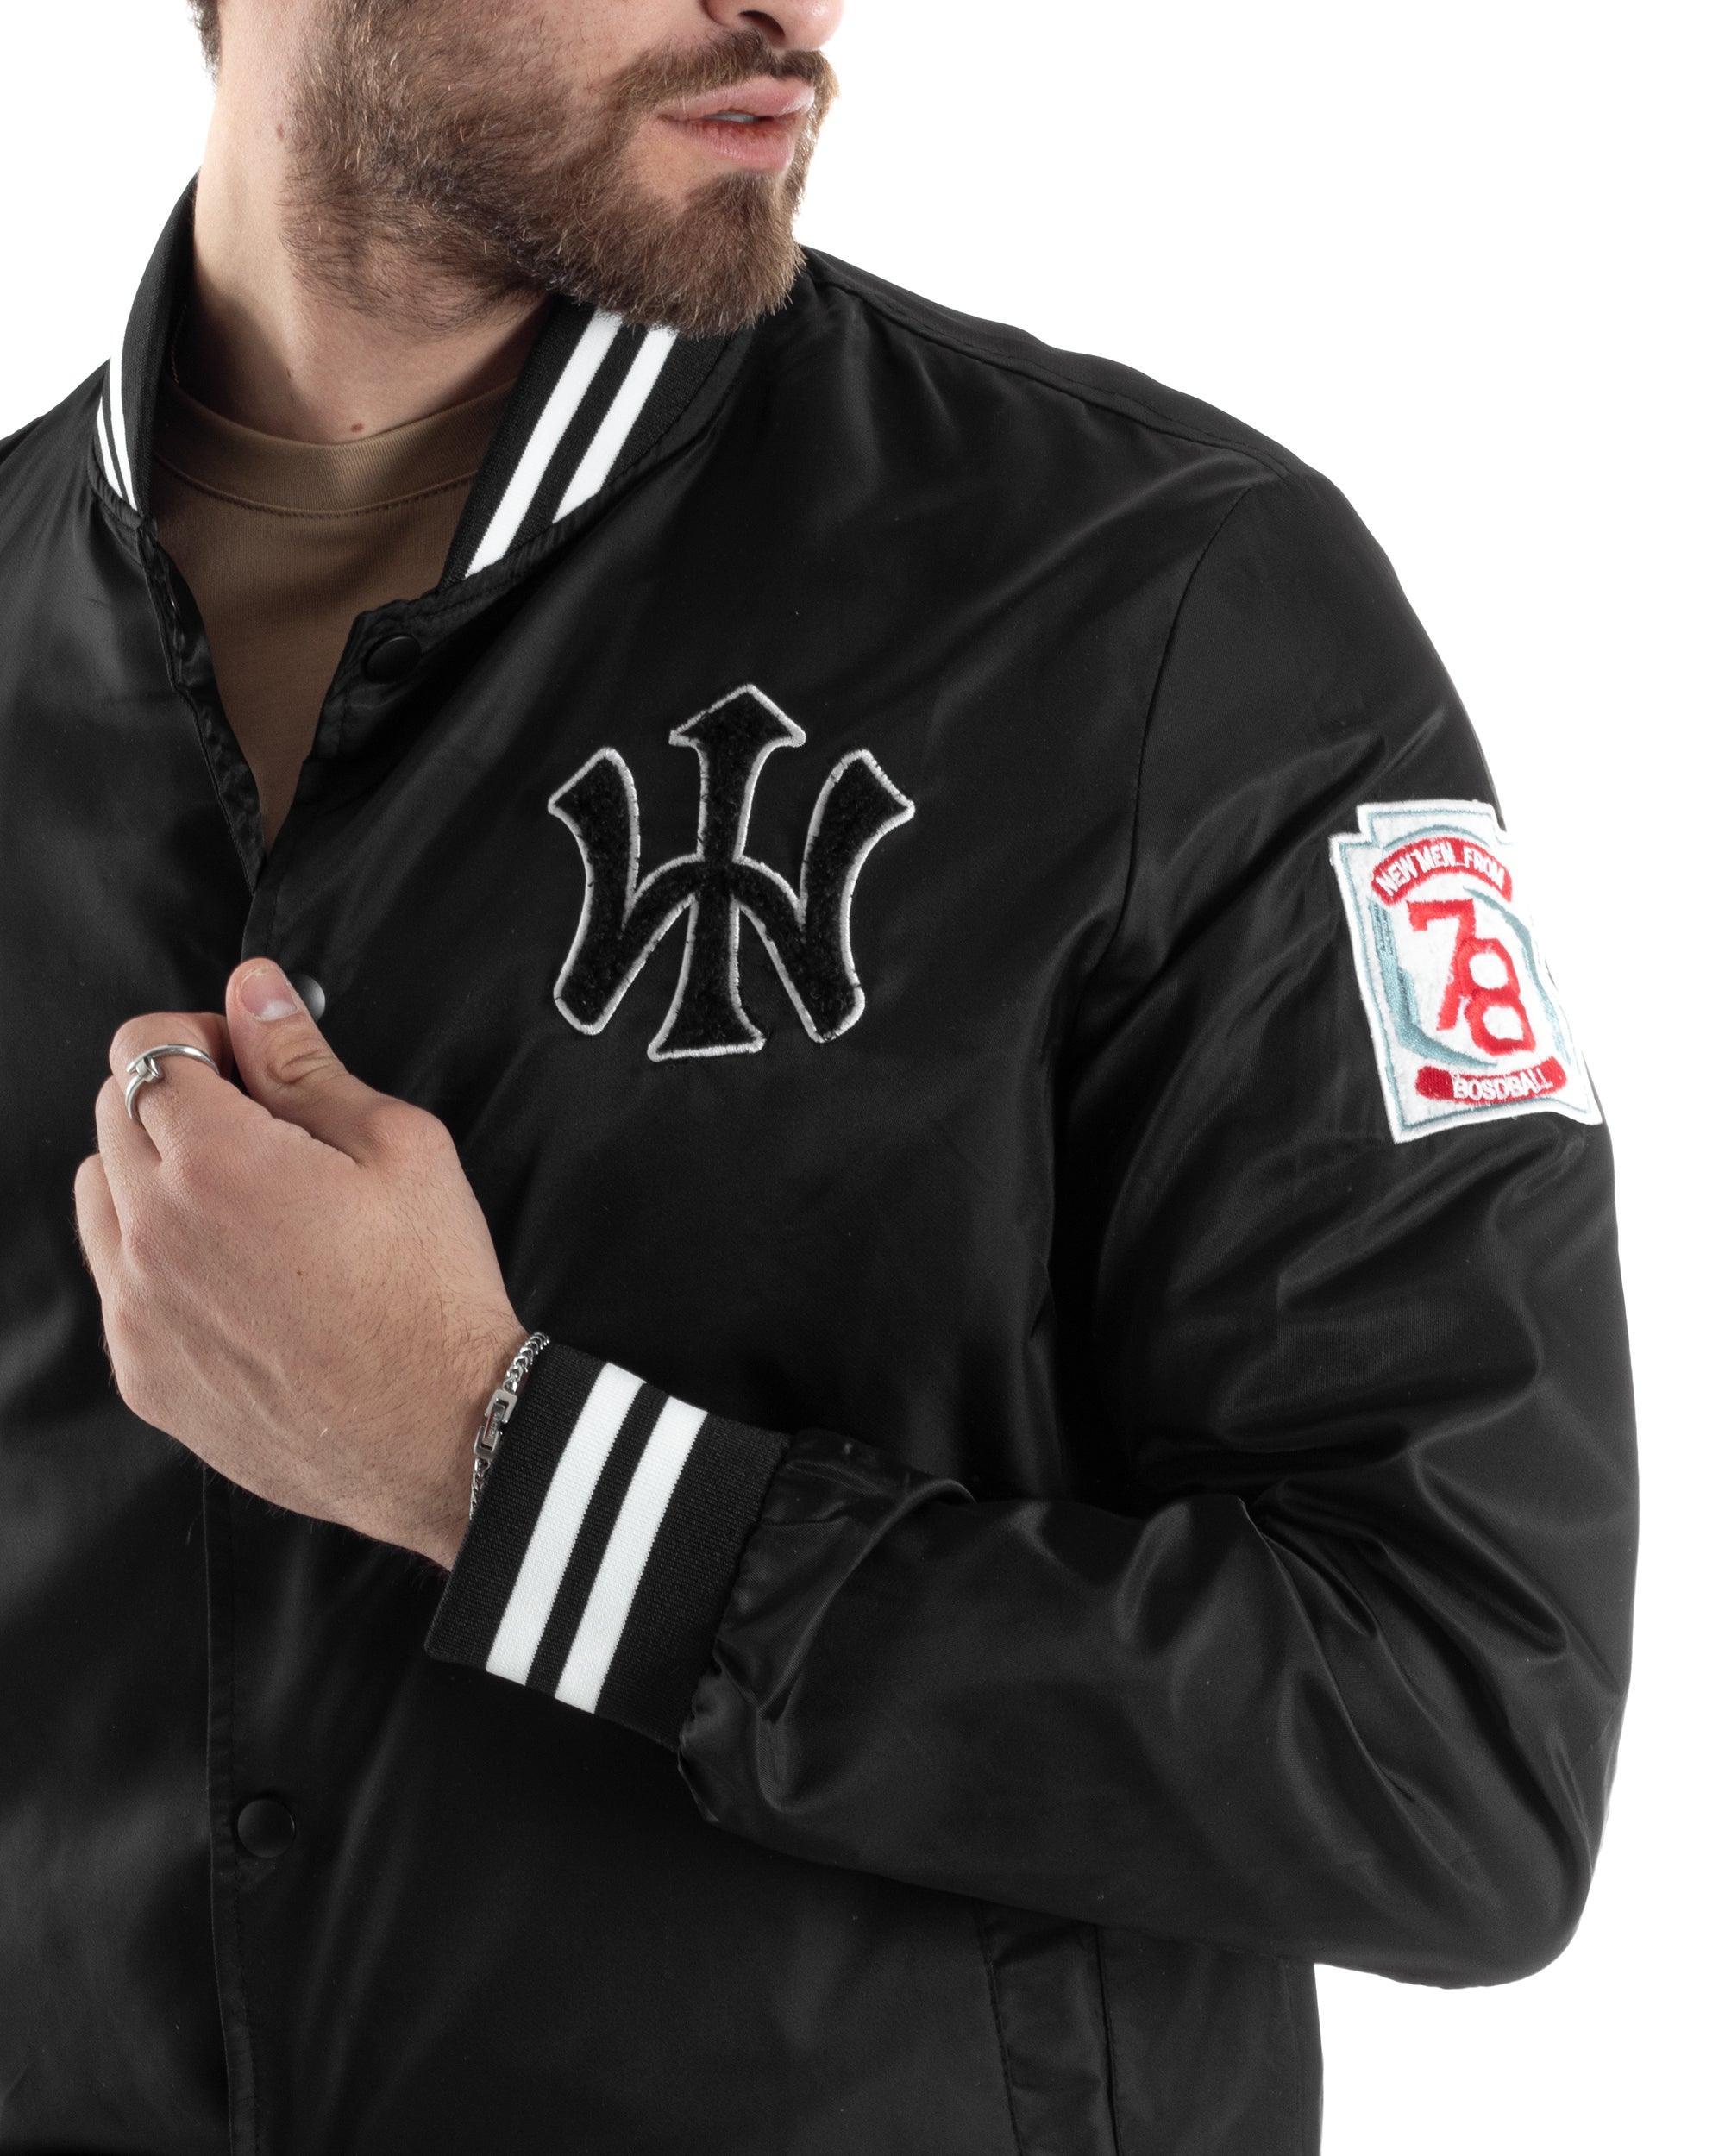 Men's Solid Color Black Long Sleeve College Basketball Casual Jacket GIOSAL